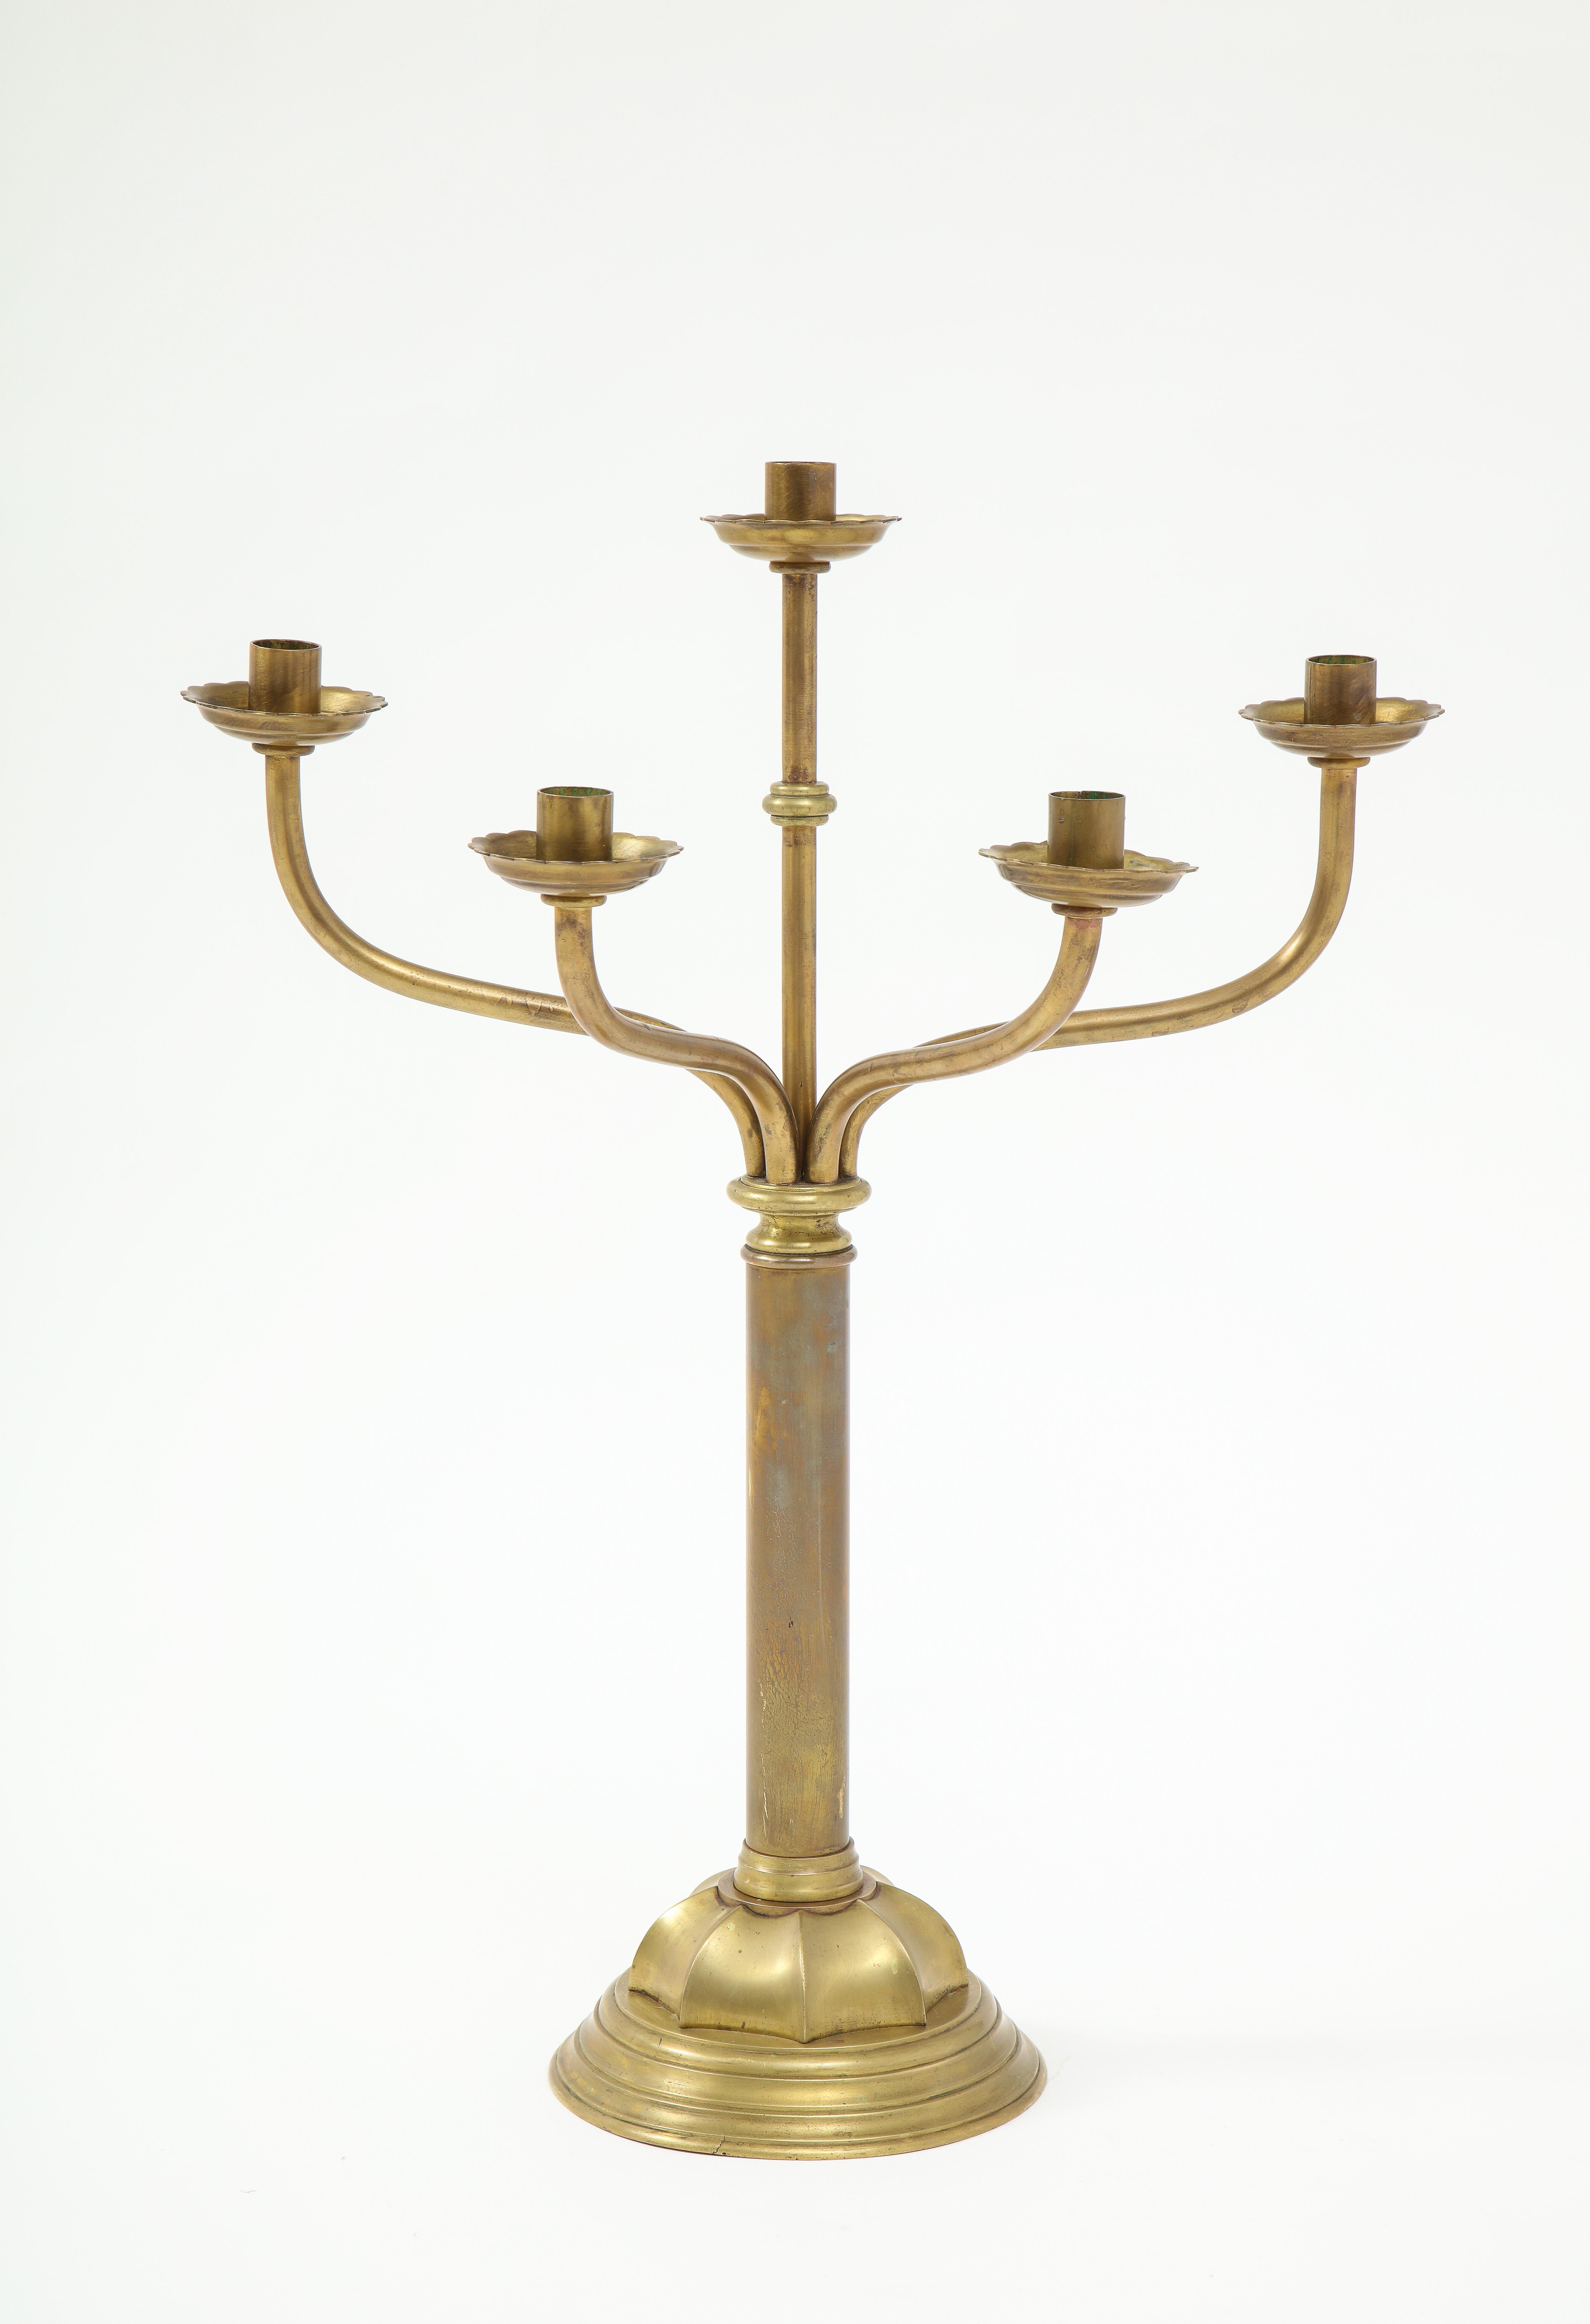 Gorham Solid Brass Antique Candlesticks In Good Condition For Sale In New York, NY